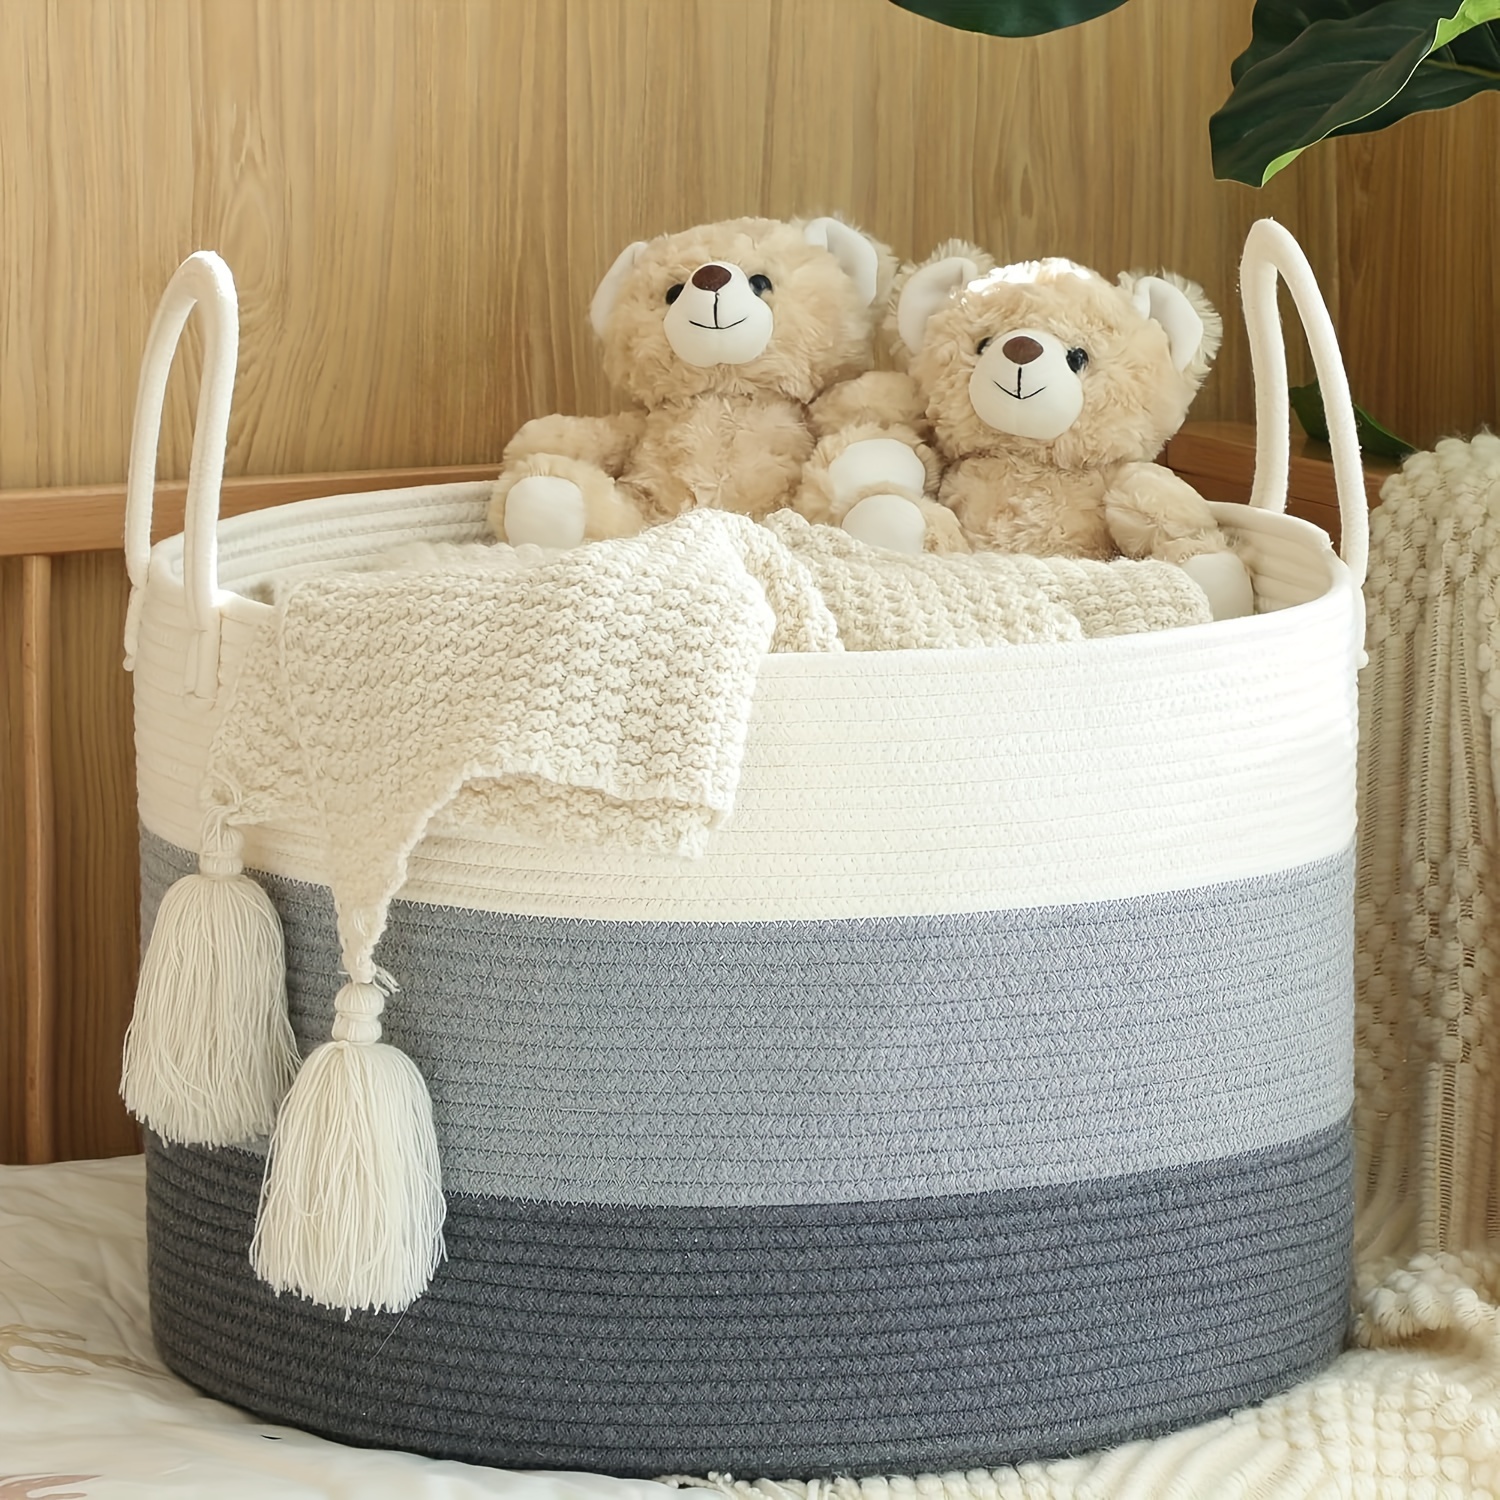 26 x 20 Extra Large Storage Basket with Lid, Cotton Rope Storage